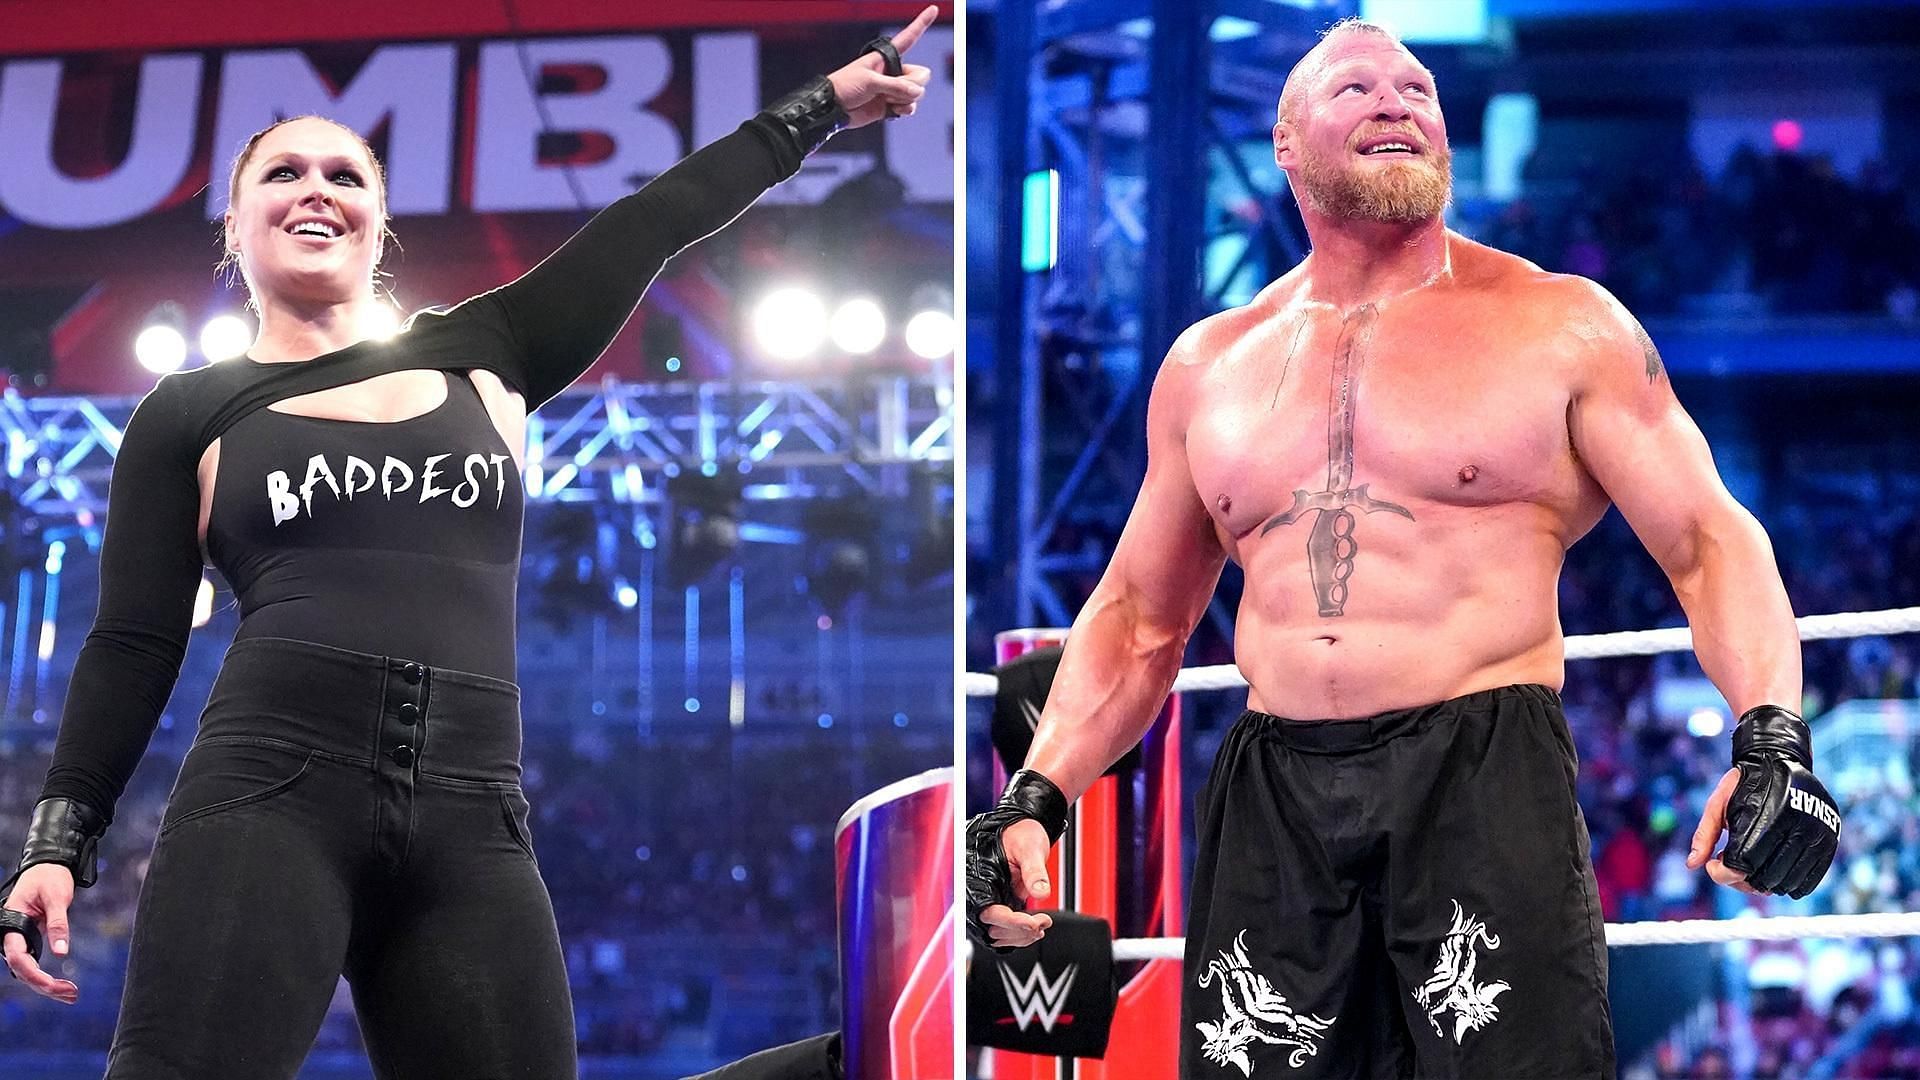 Ronda Rousey and Brock Lesnar won their respective Royal Rumble matches on Saturday night